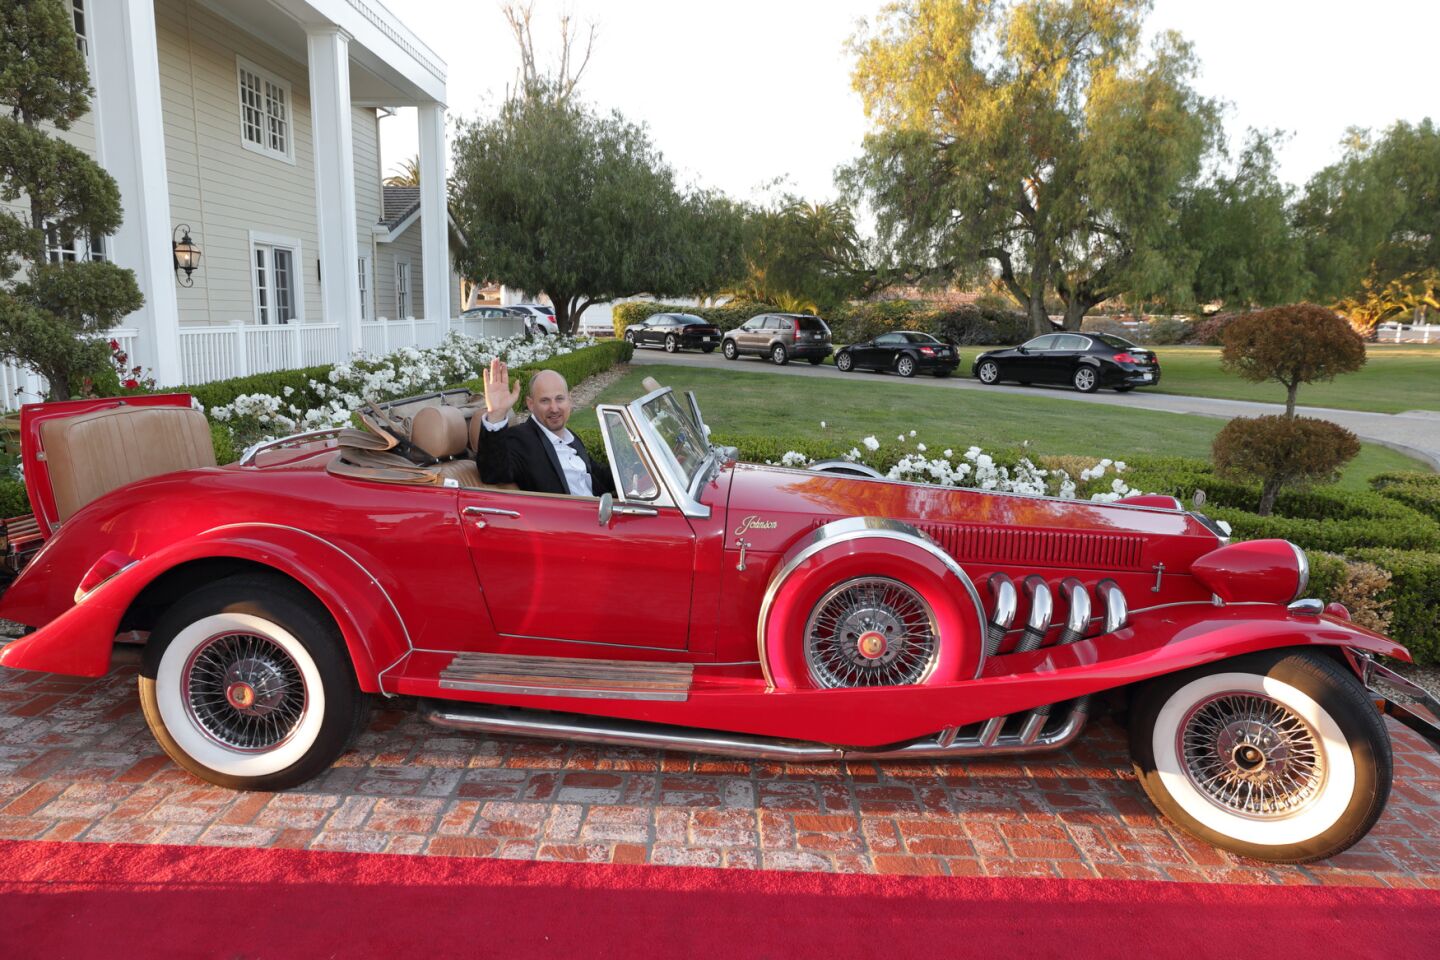 Peter Tomson in a mirror image of a 1935 Duesenberg Roadster Convertible built in 1985 by Johnson Motor Company